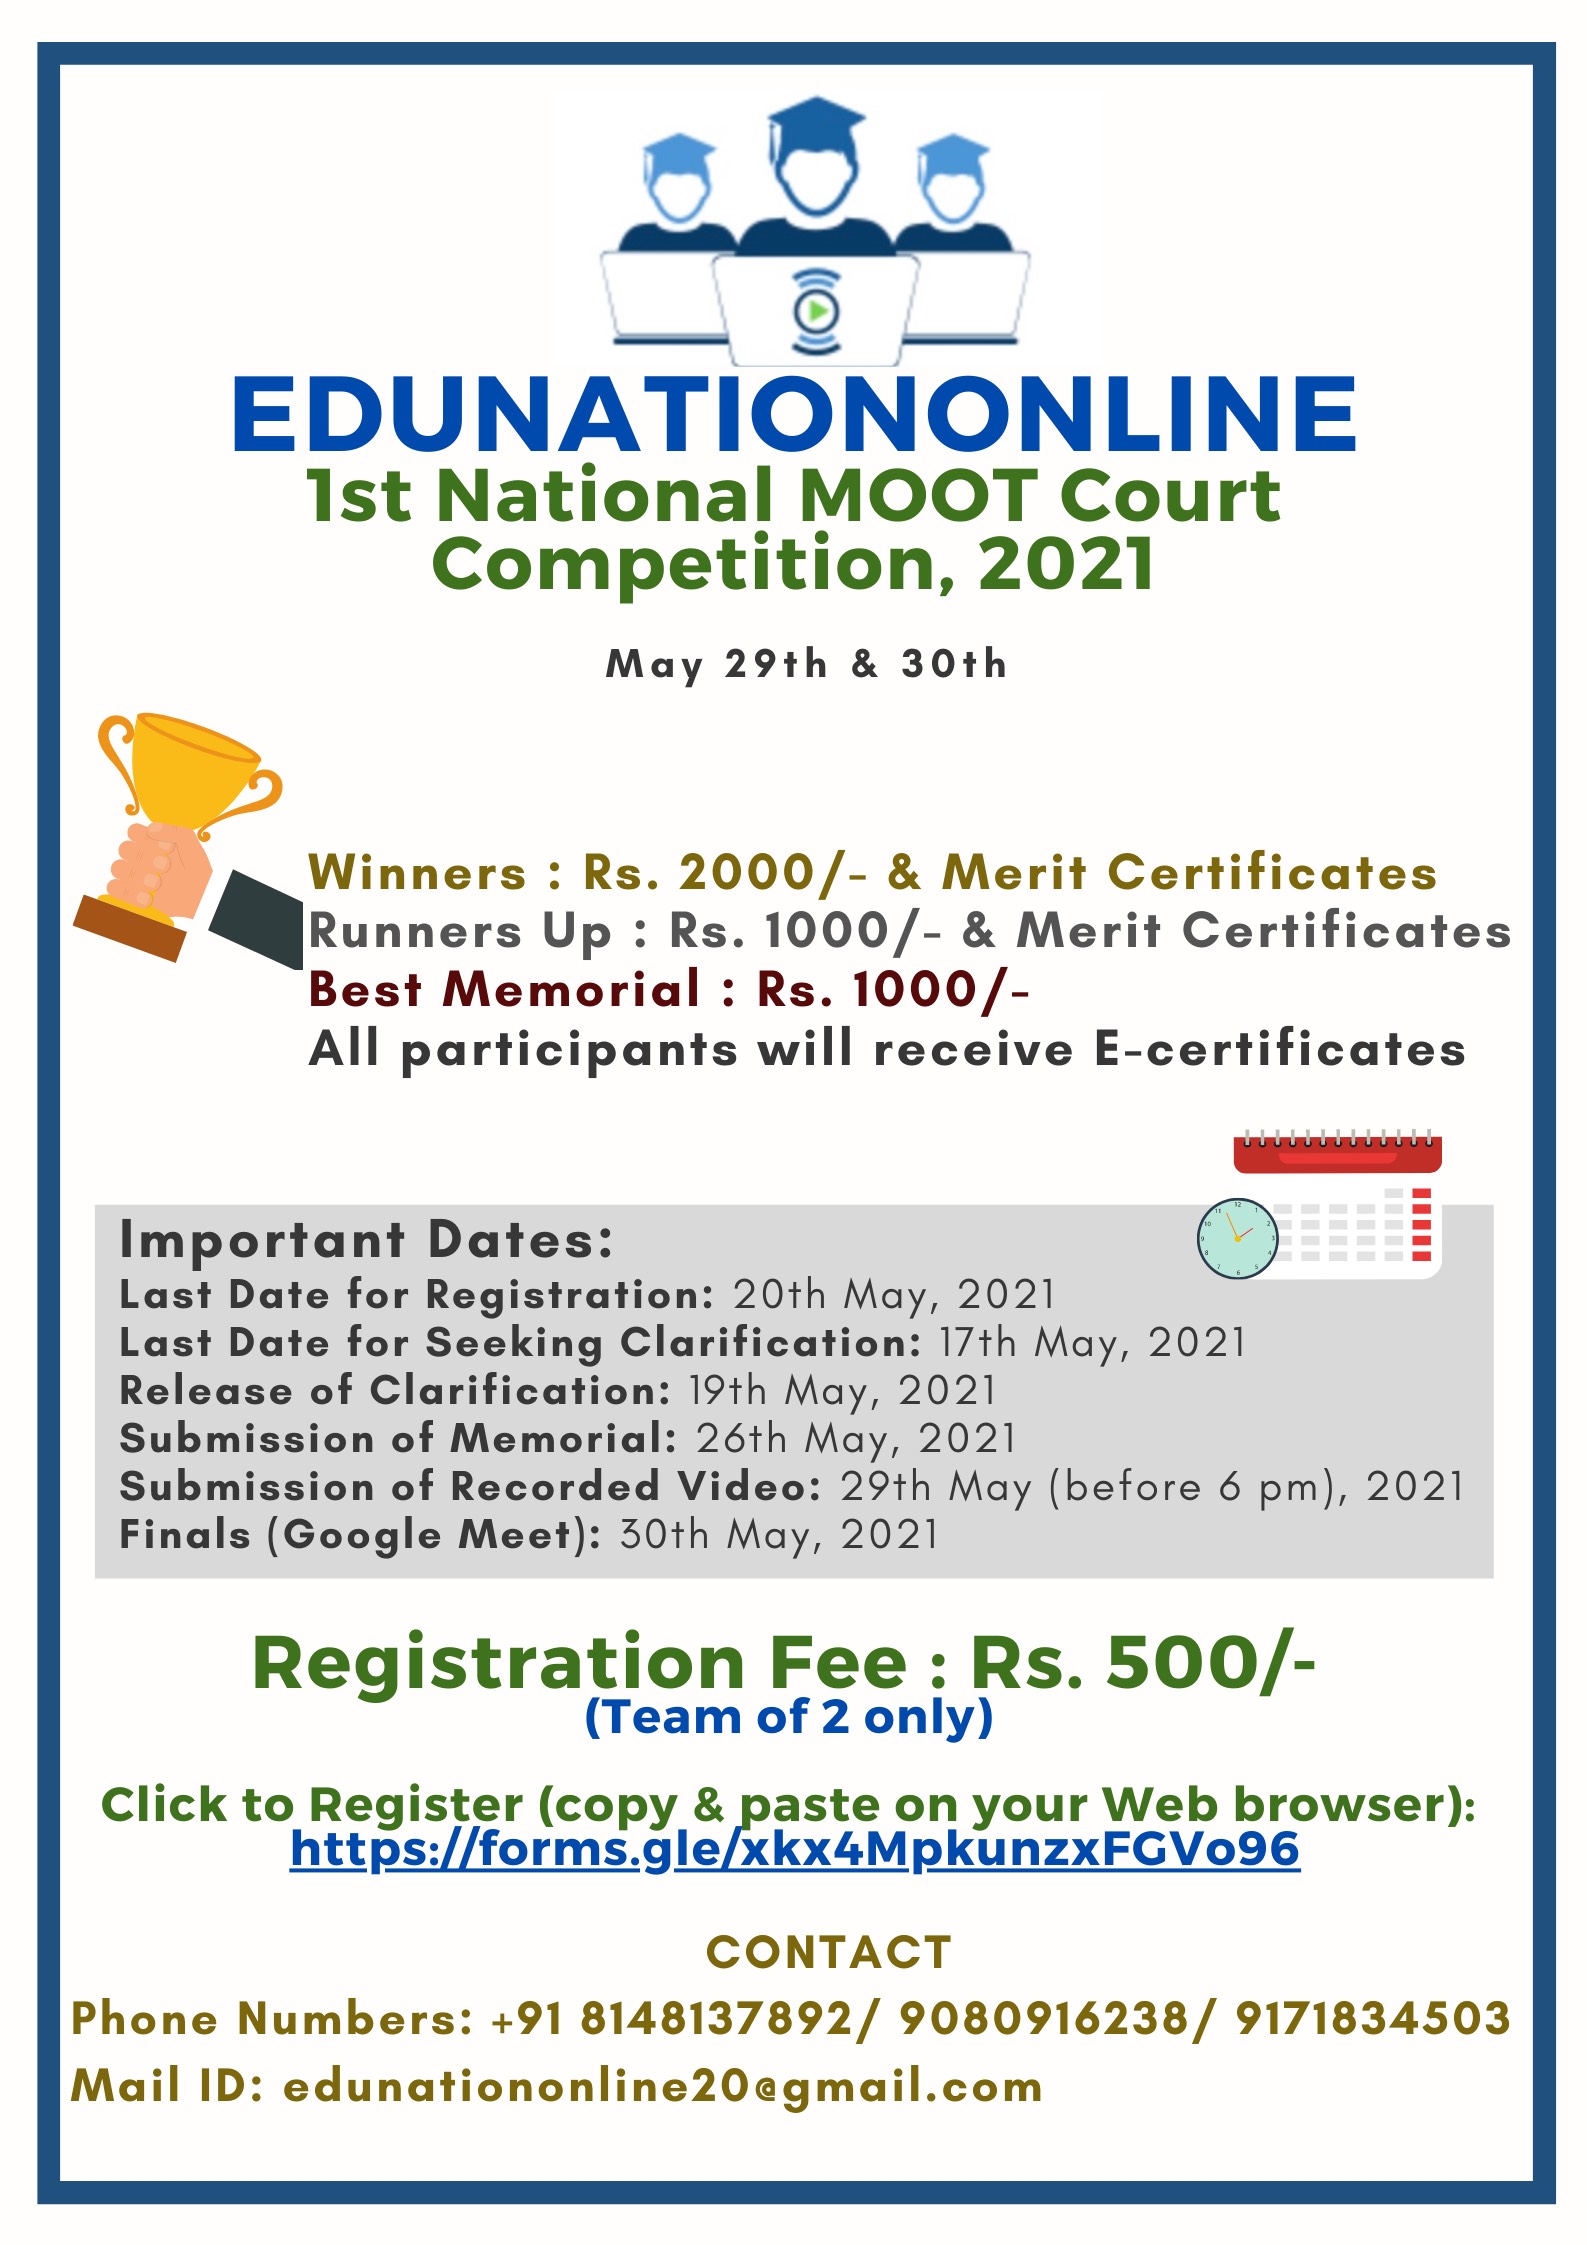 EDUNATIONONLINE'S 1ST NATIONAL MOOT COURT COMPETITION ...